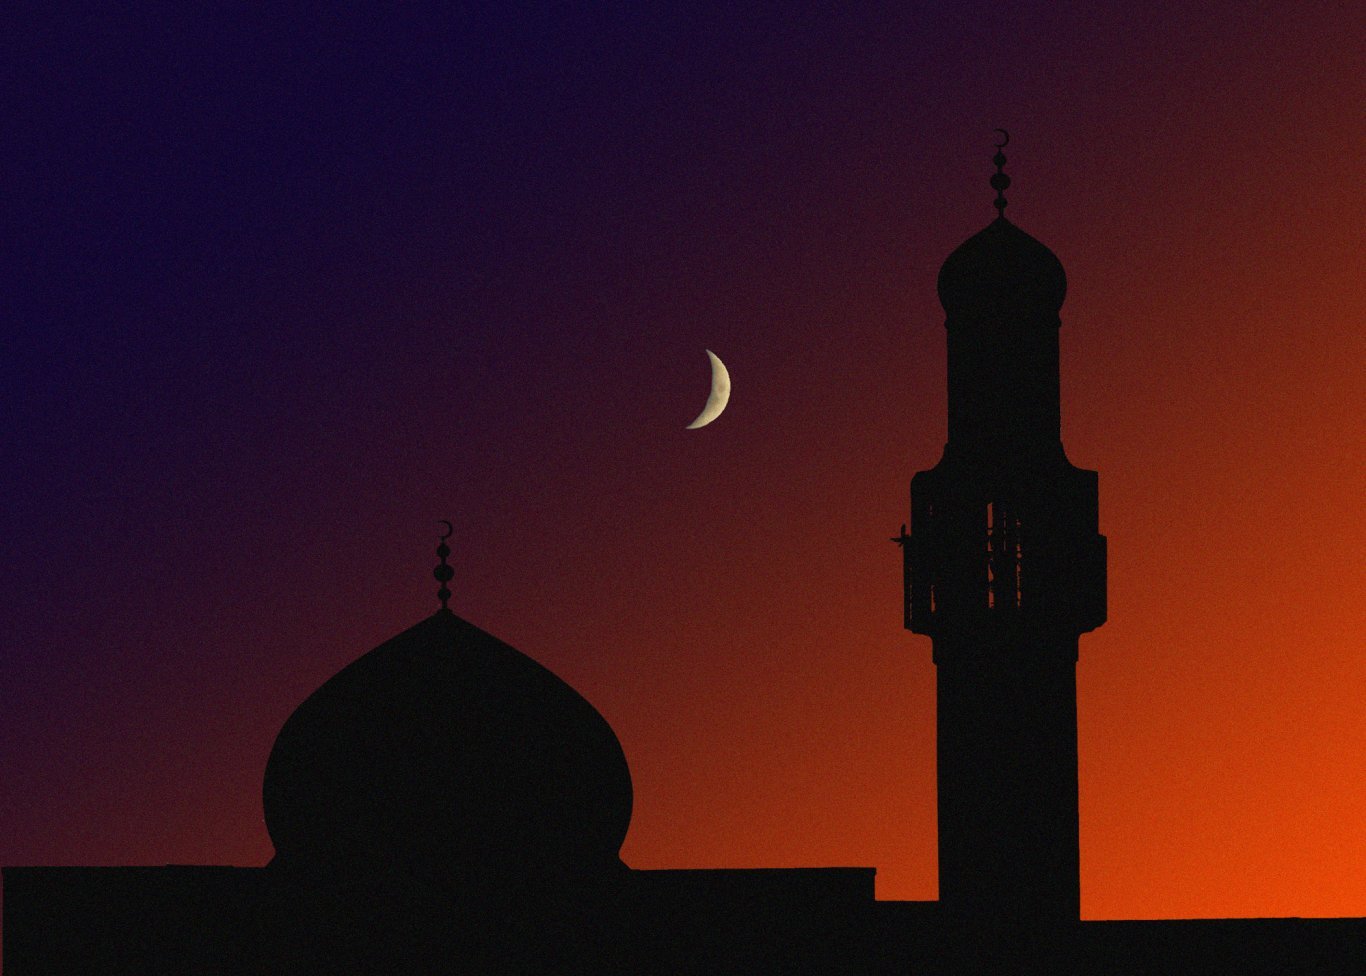 Crescent moon over a mosque